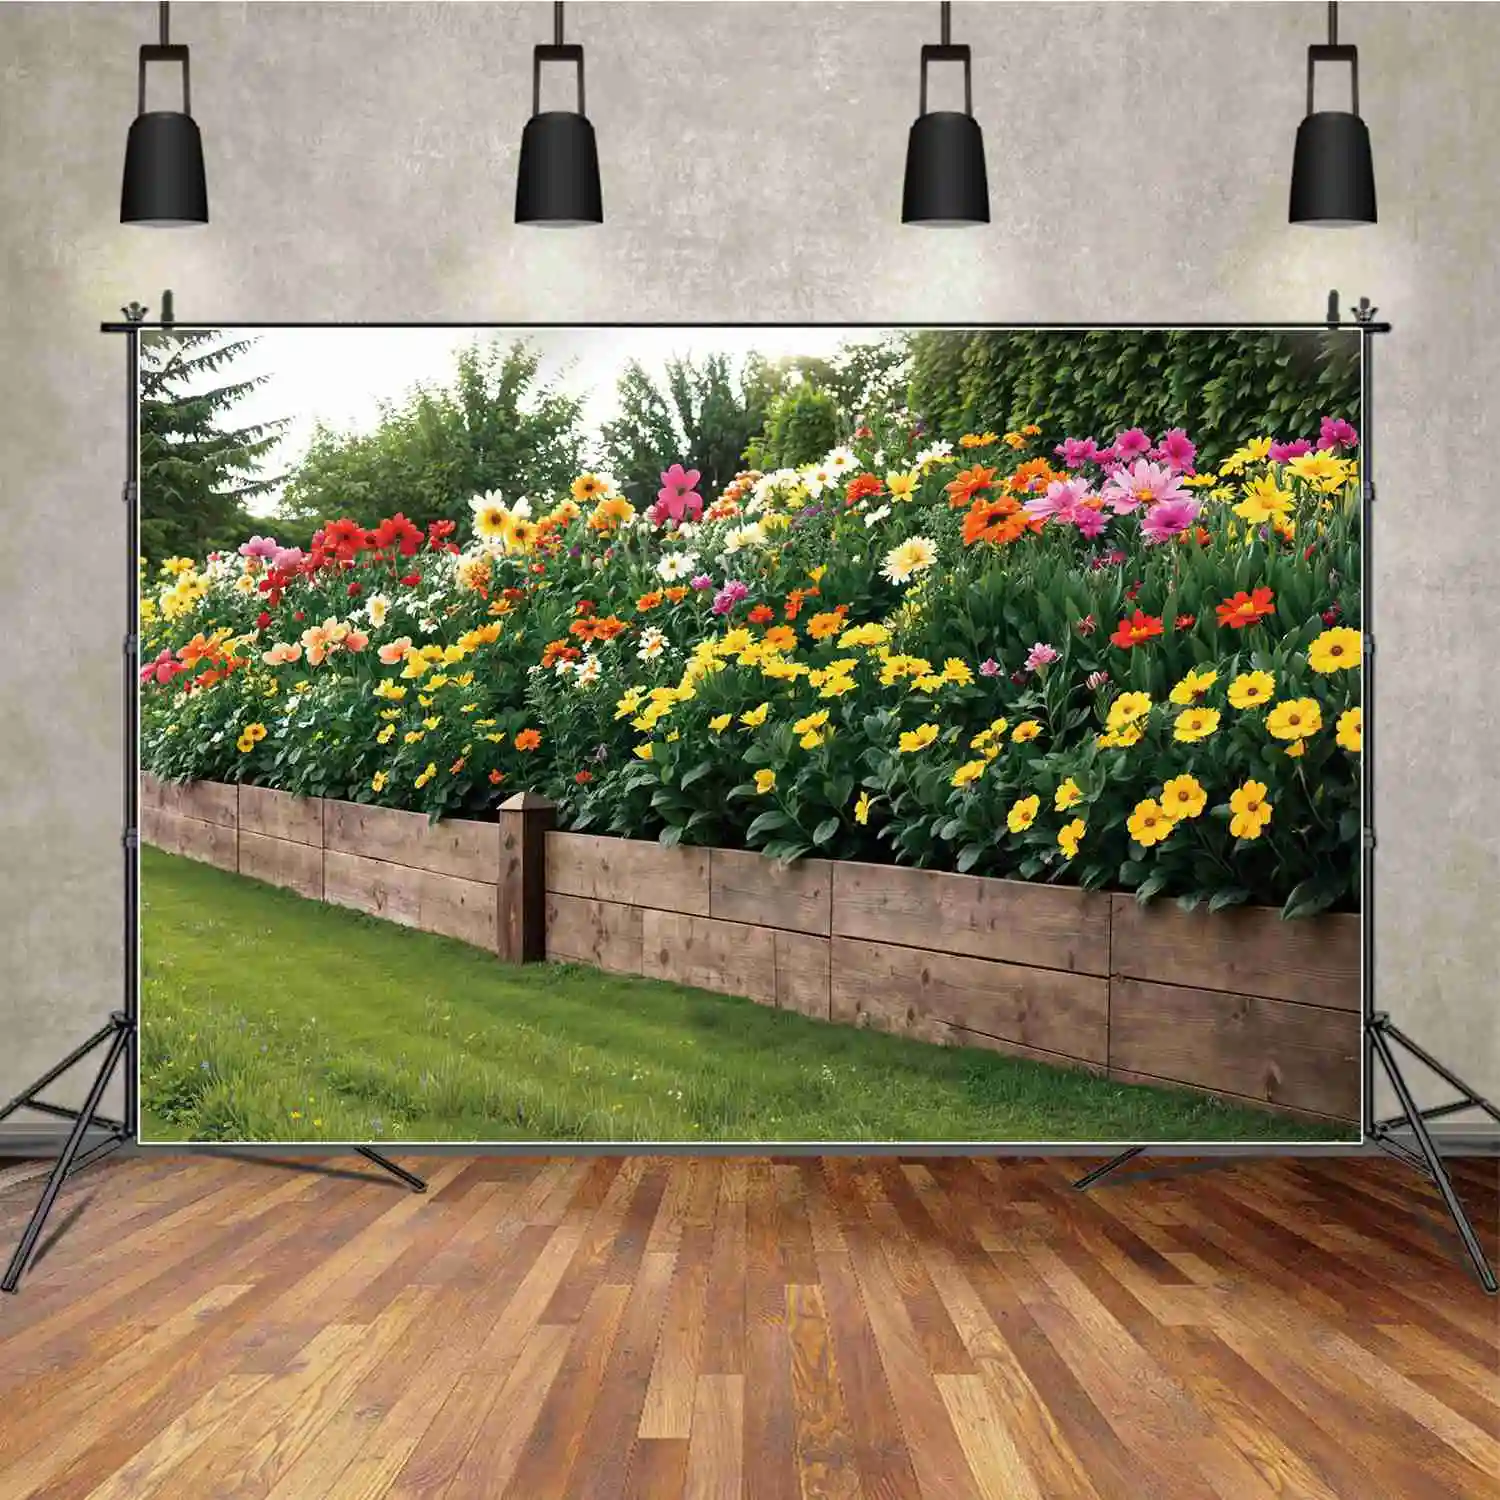 

Spring Garden Blossom Scenery Photography Backdrops Grassland Flowers Trees Customized Children'S Photo Backgrounds Studio Props